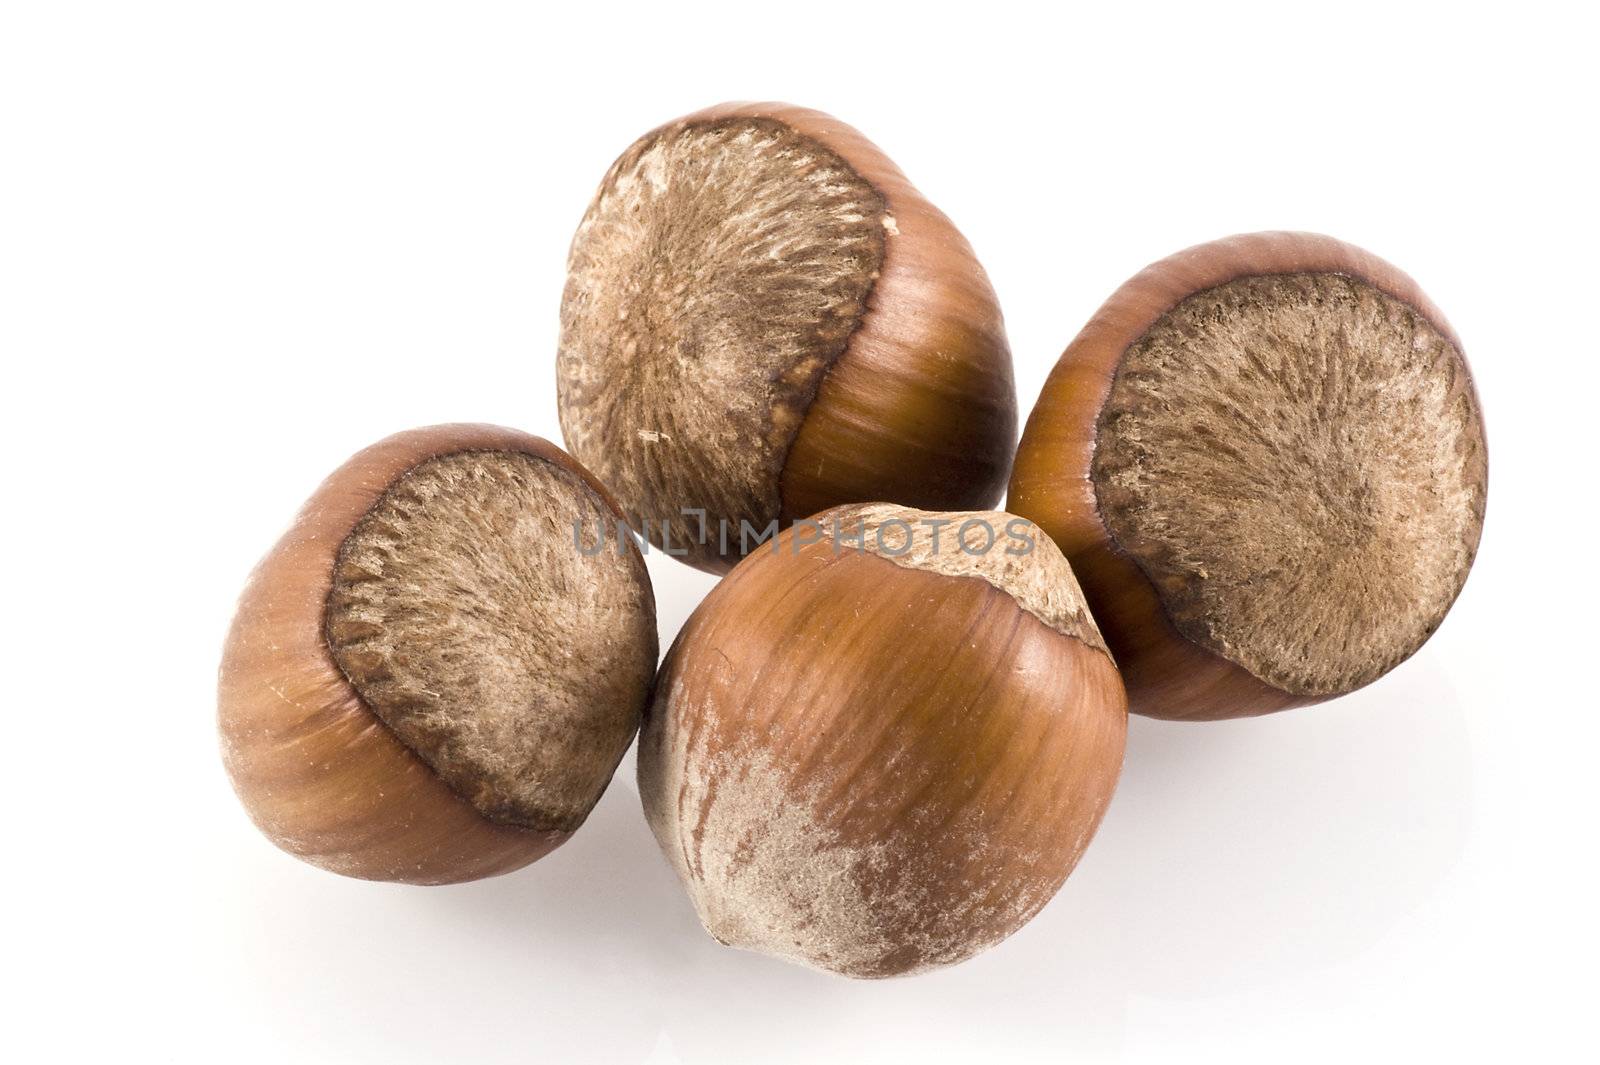 Close up of some hazelnuts on a white background.